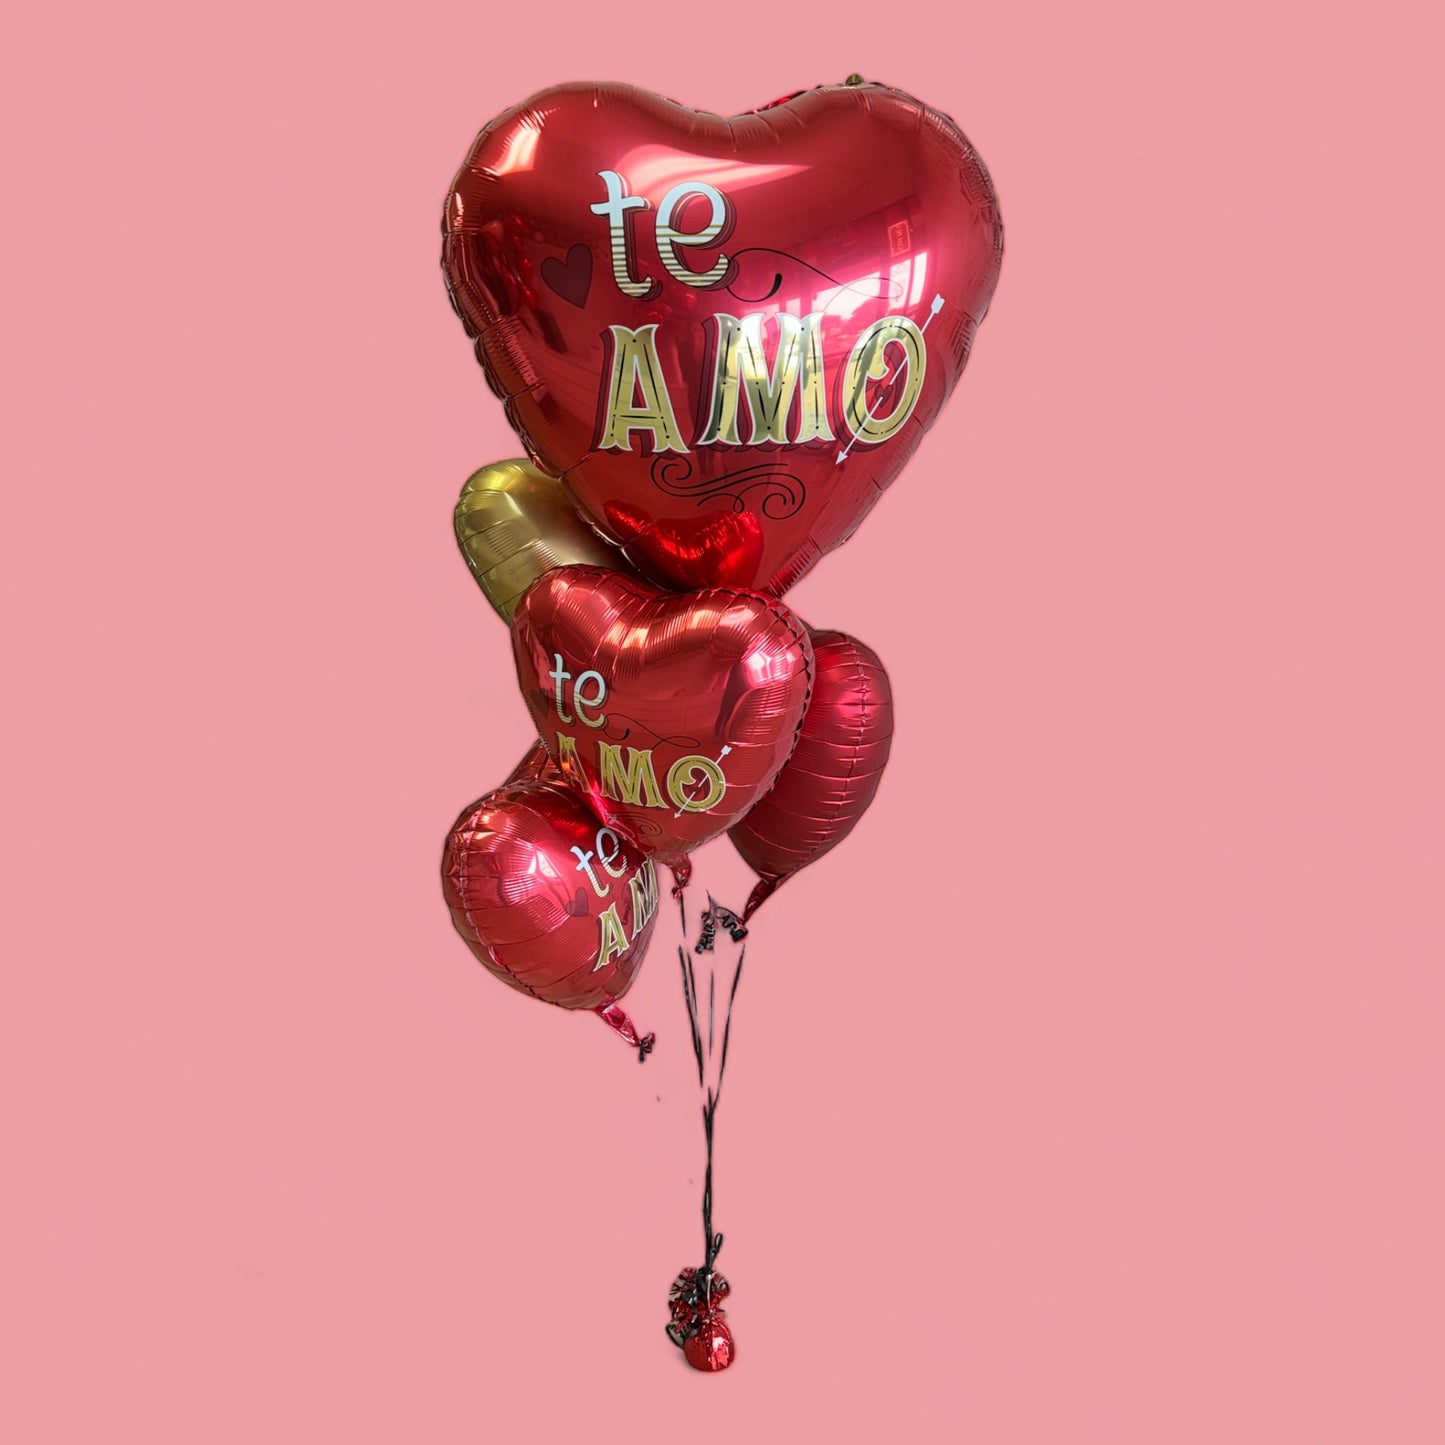 Love and Anniversary Balloons